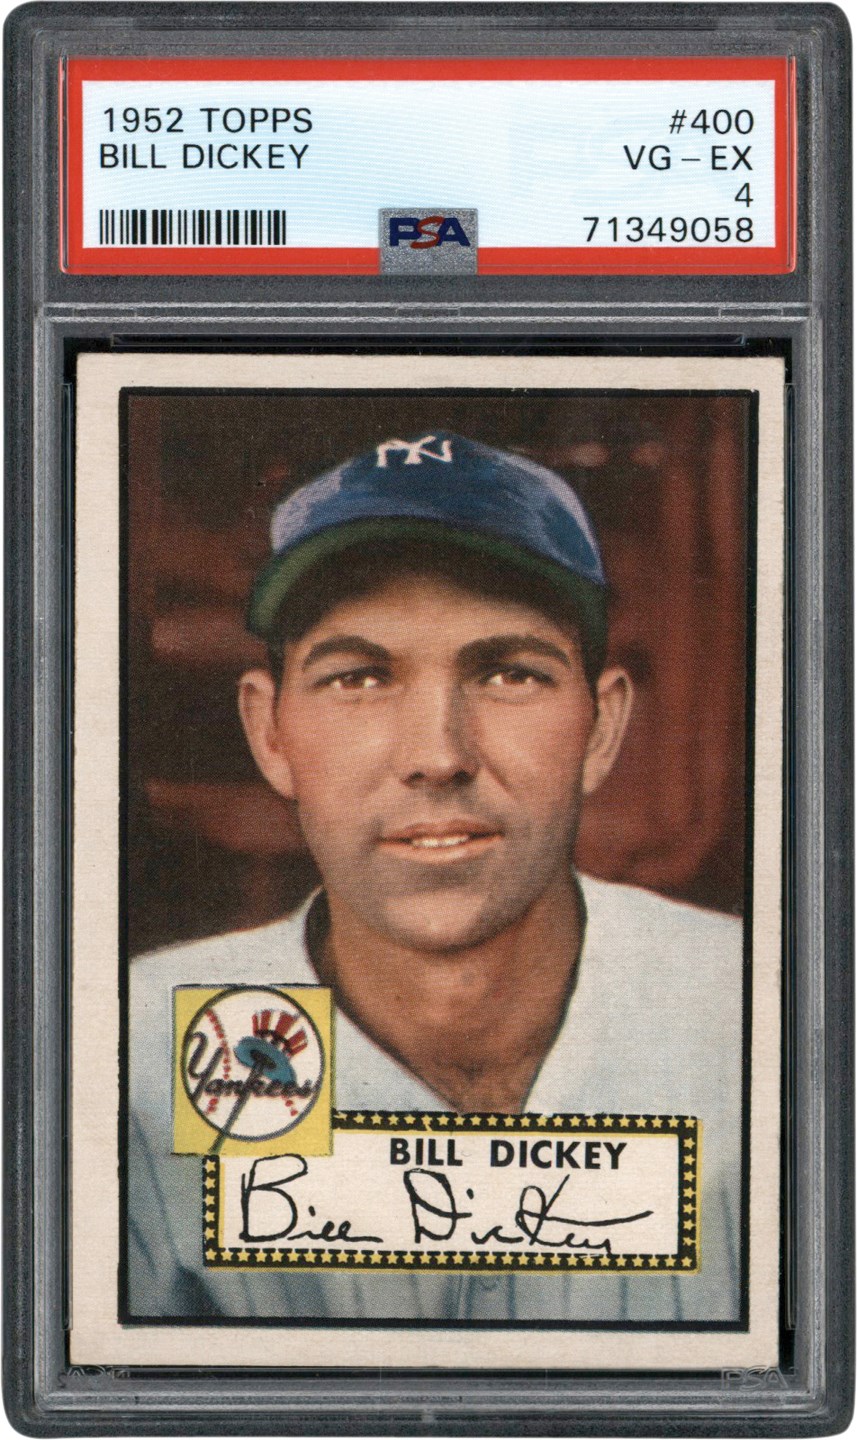 1952 Topps #400 Bill Dickey PSA VG-EX 4 - Newly Discovered Example